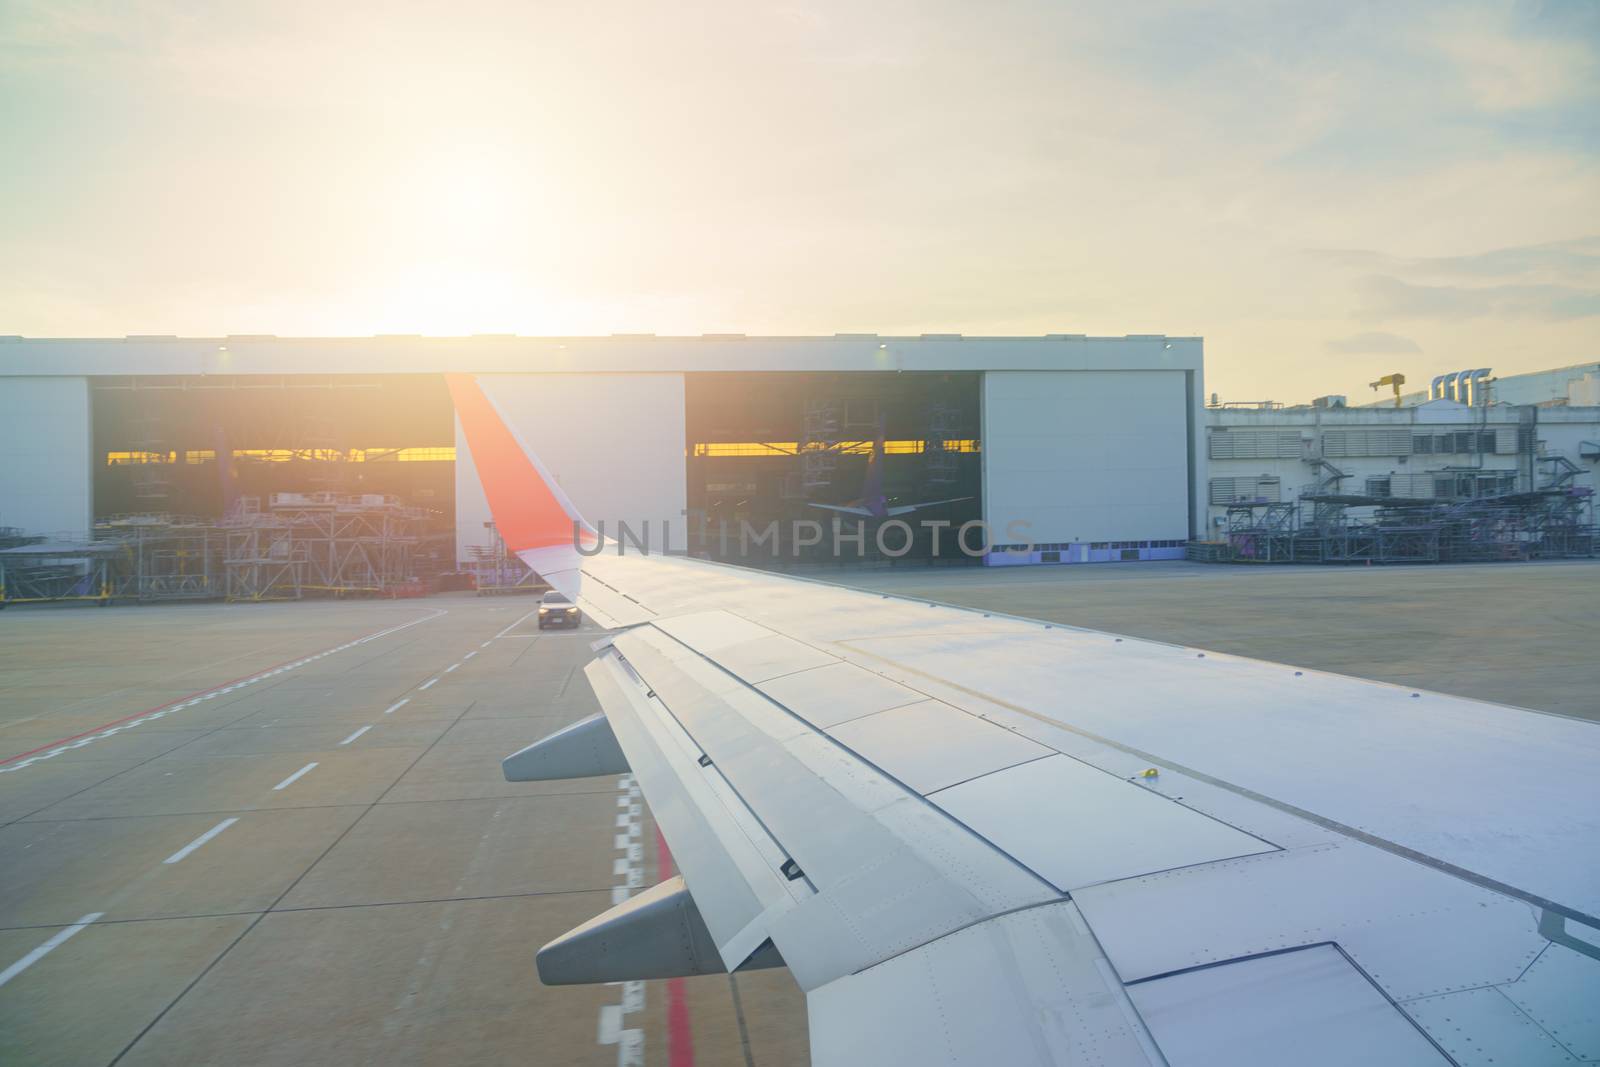 Private aviation view from inside window Airplane airliner aircraft The plane is parking bay on Terminal runway while waiting Compartment and Hangar background Sunlight and flare in BANGKOK THAILAND